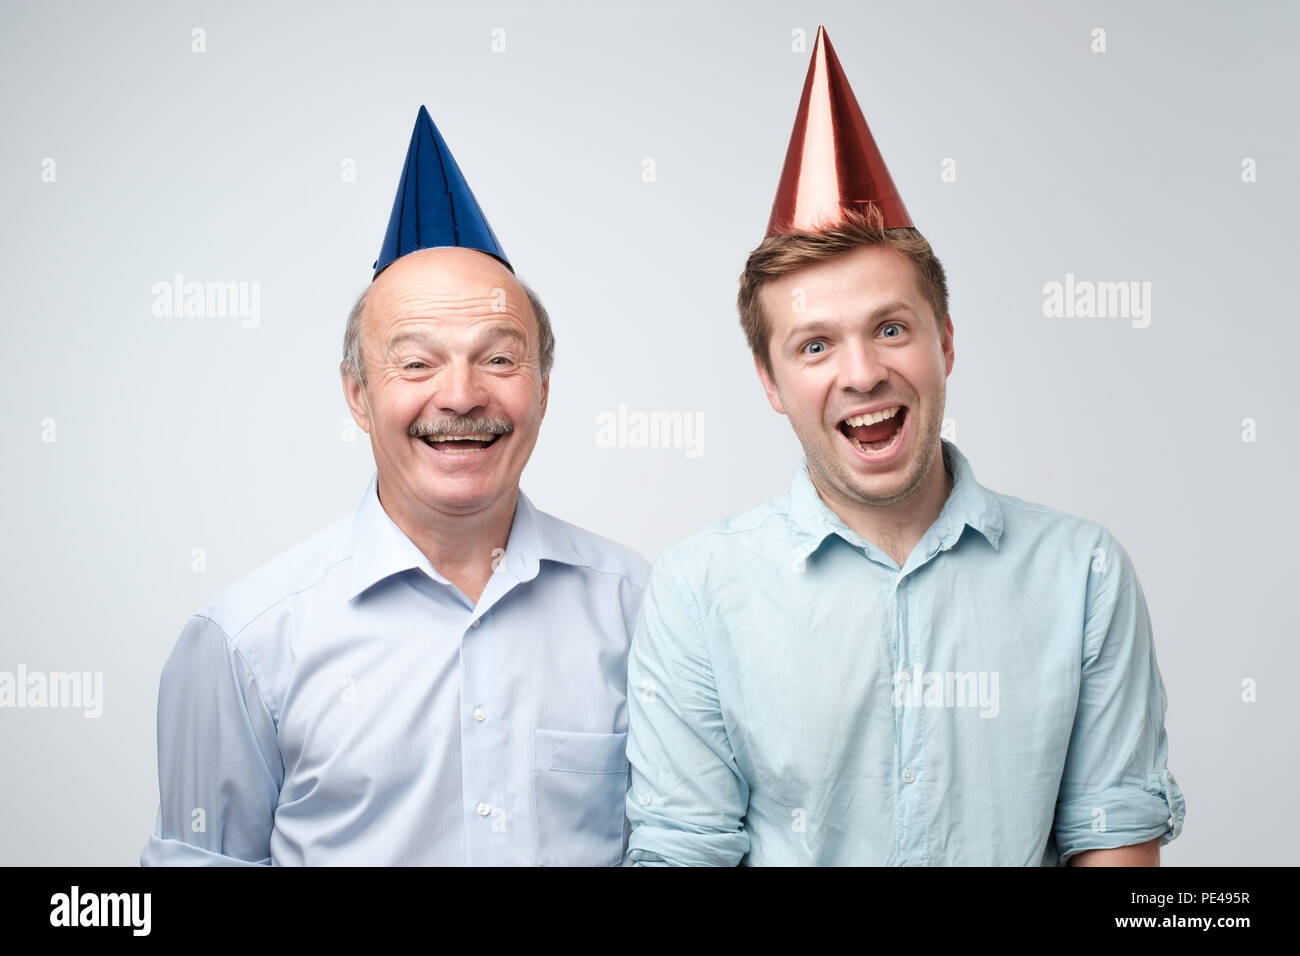 Mature man and his young son celebrating happy birthday wearing